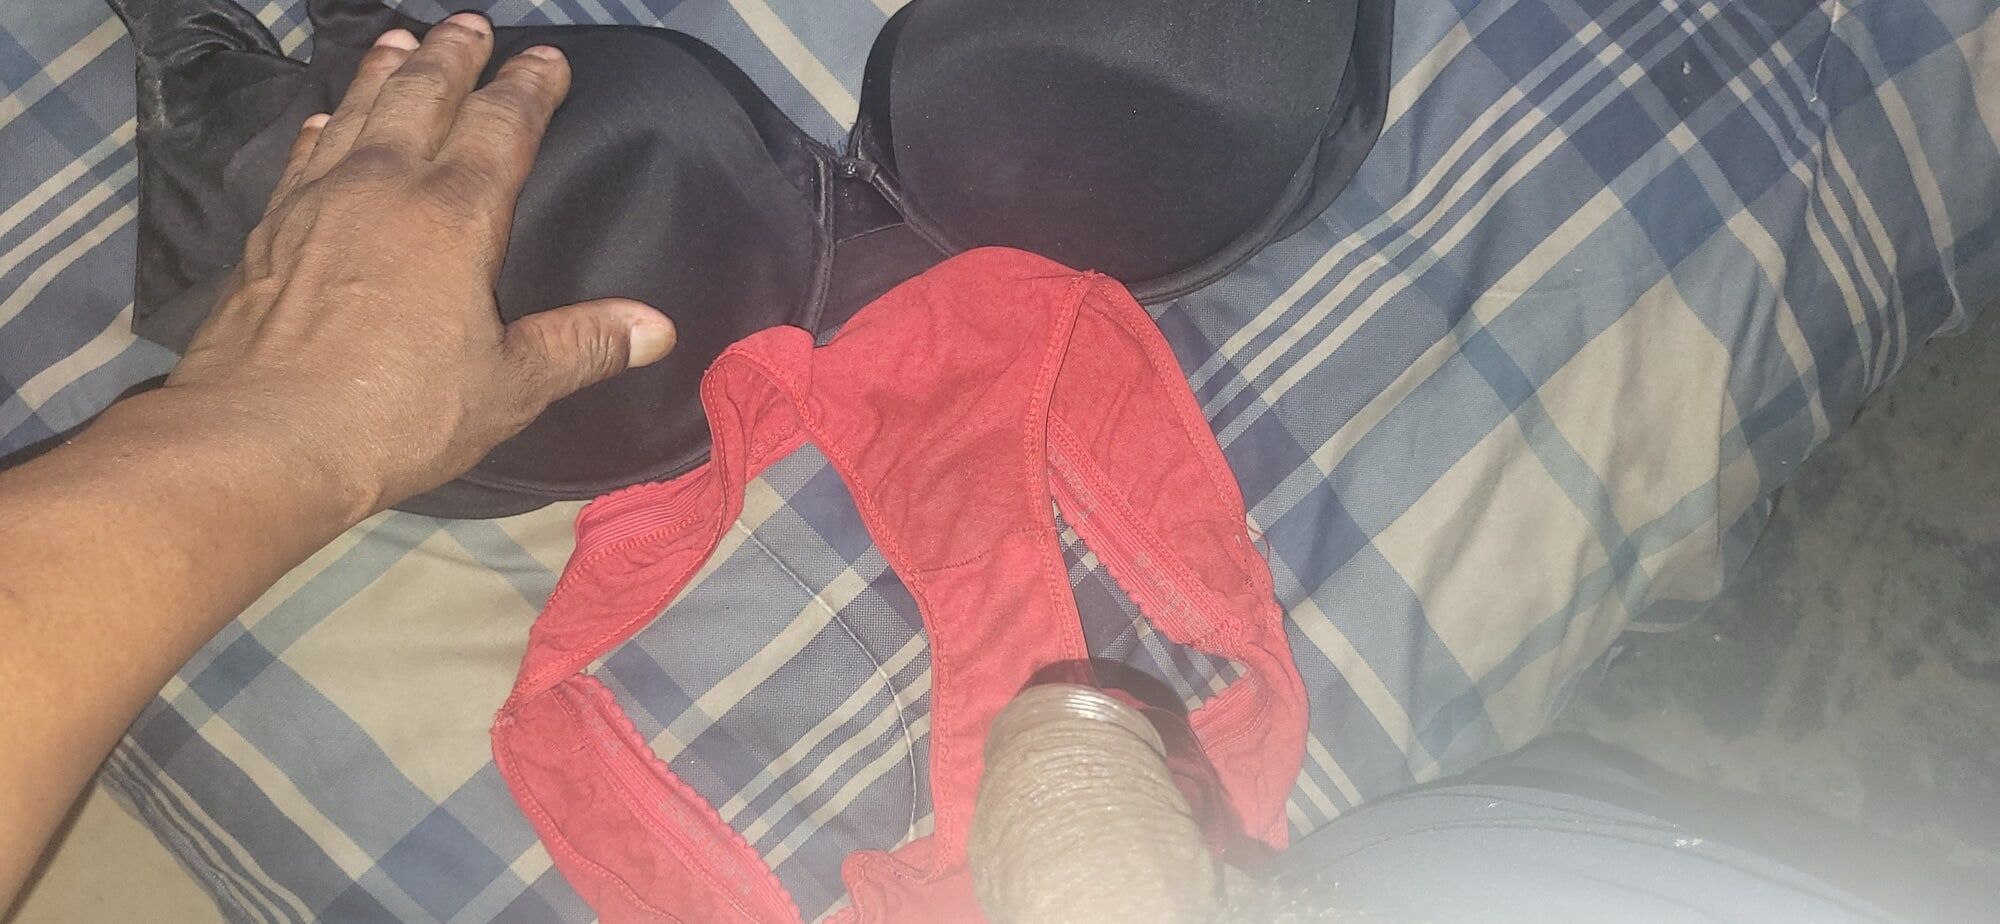 Playing With Wife's Panty & Bra